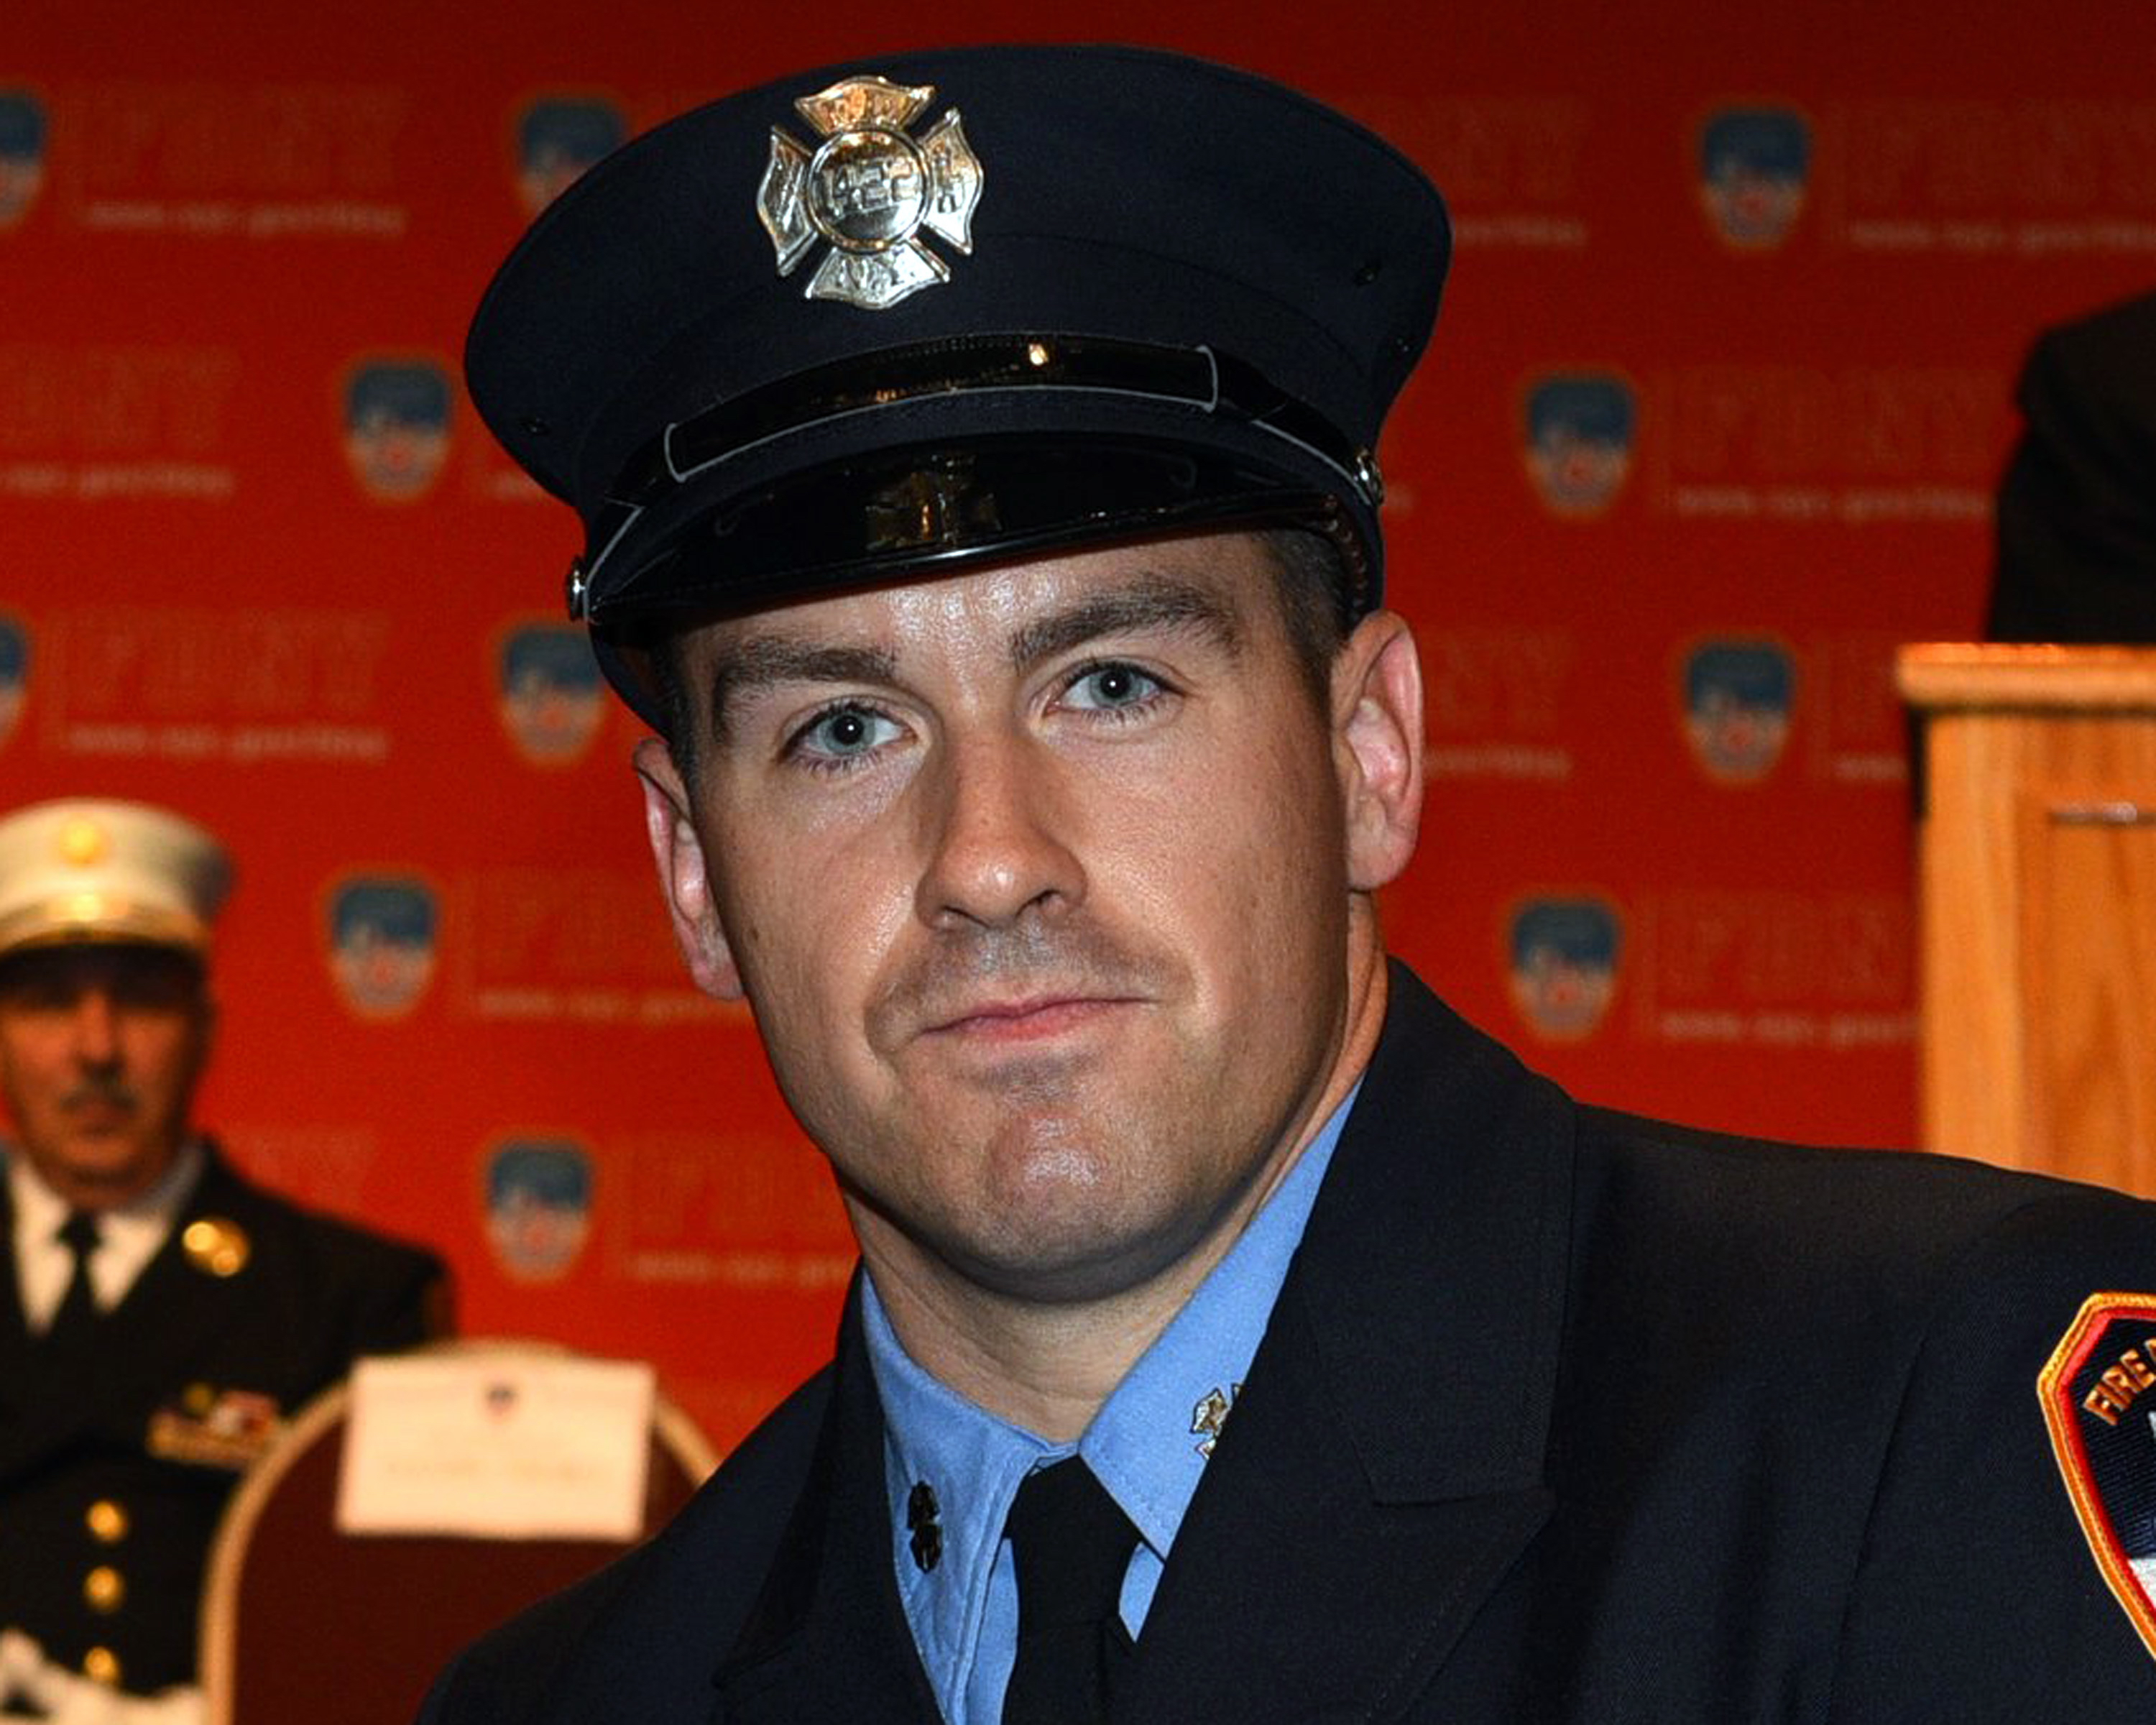 This undated photo provided by the New York City Fire Department shows firefighter Steven H. Pollard. A New York City firefighter responding to a car accident in Brooklyn fell from an overpass and died at a hospital. In statement on the Fire Department's Facebook page Monday, Jan. 7, 2019, Fire Commissioner Daniel Nigro and Mayor Bill de Blasio identified the probationary firefighter as Pollard. (New York City Fire Department via AP)